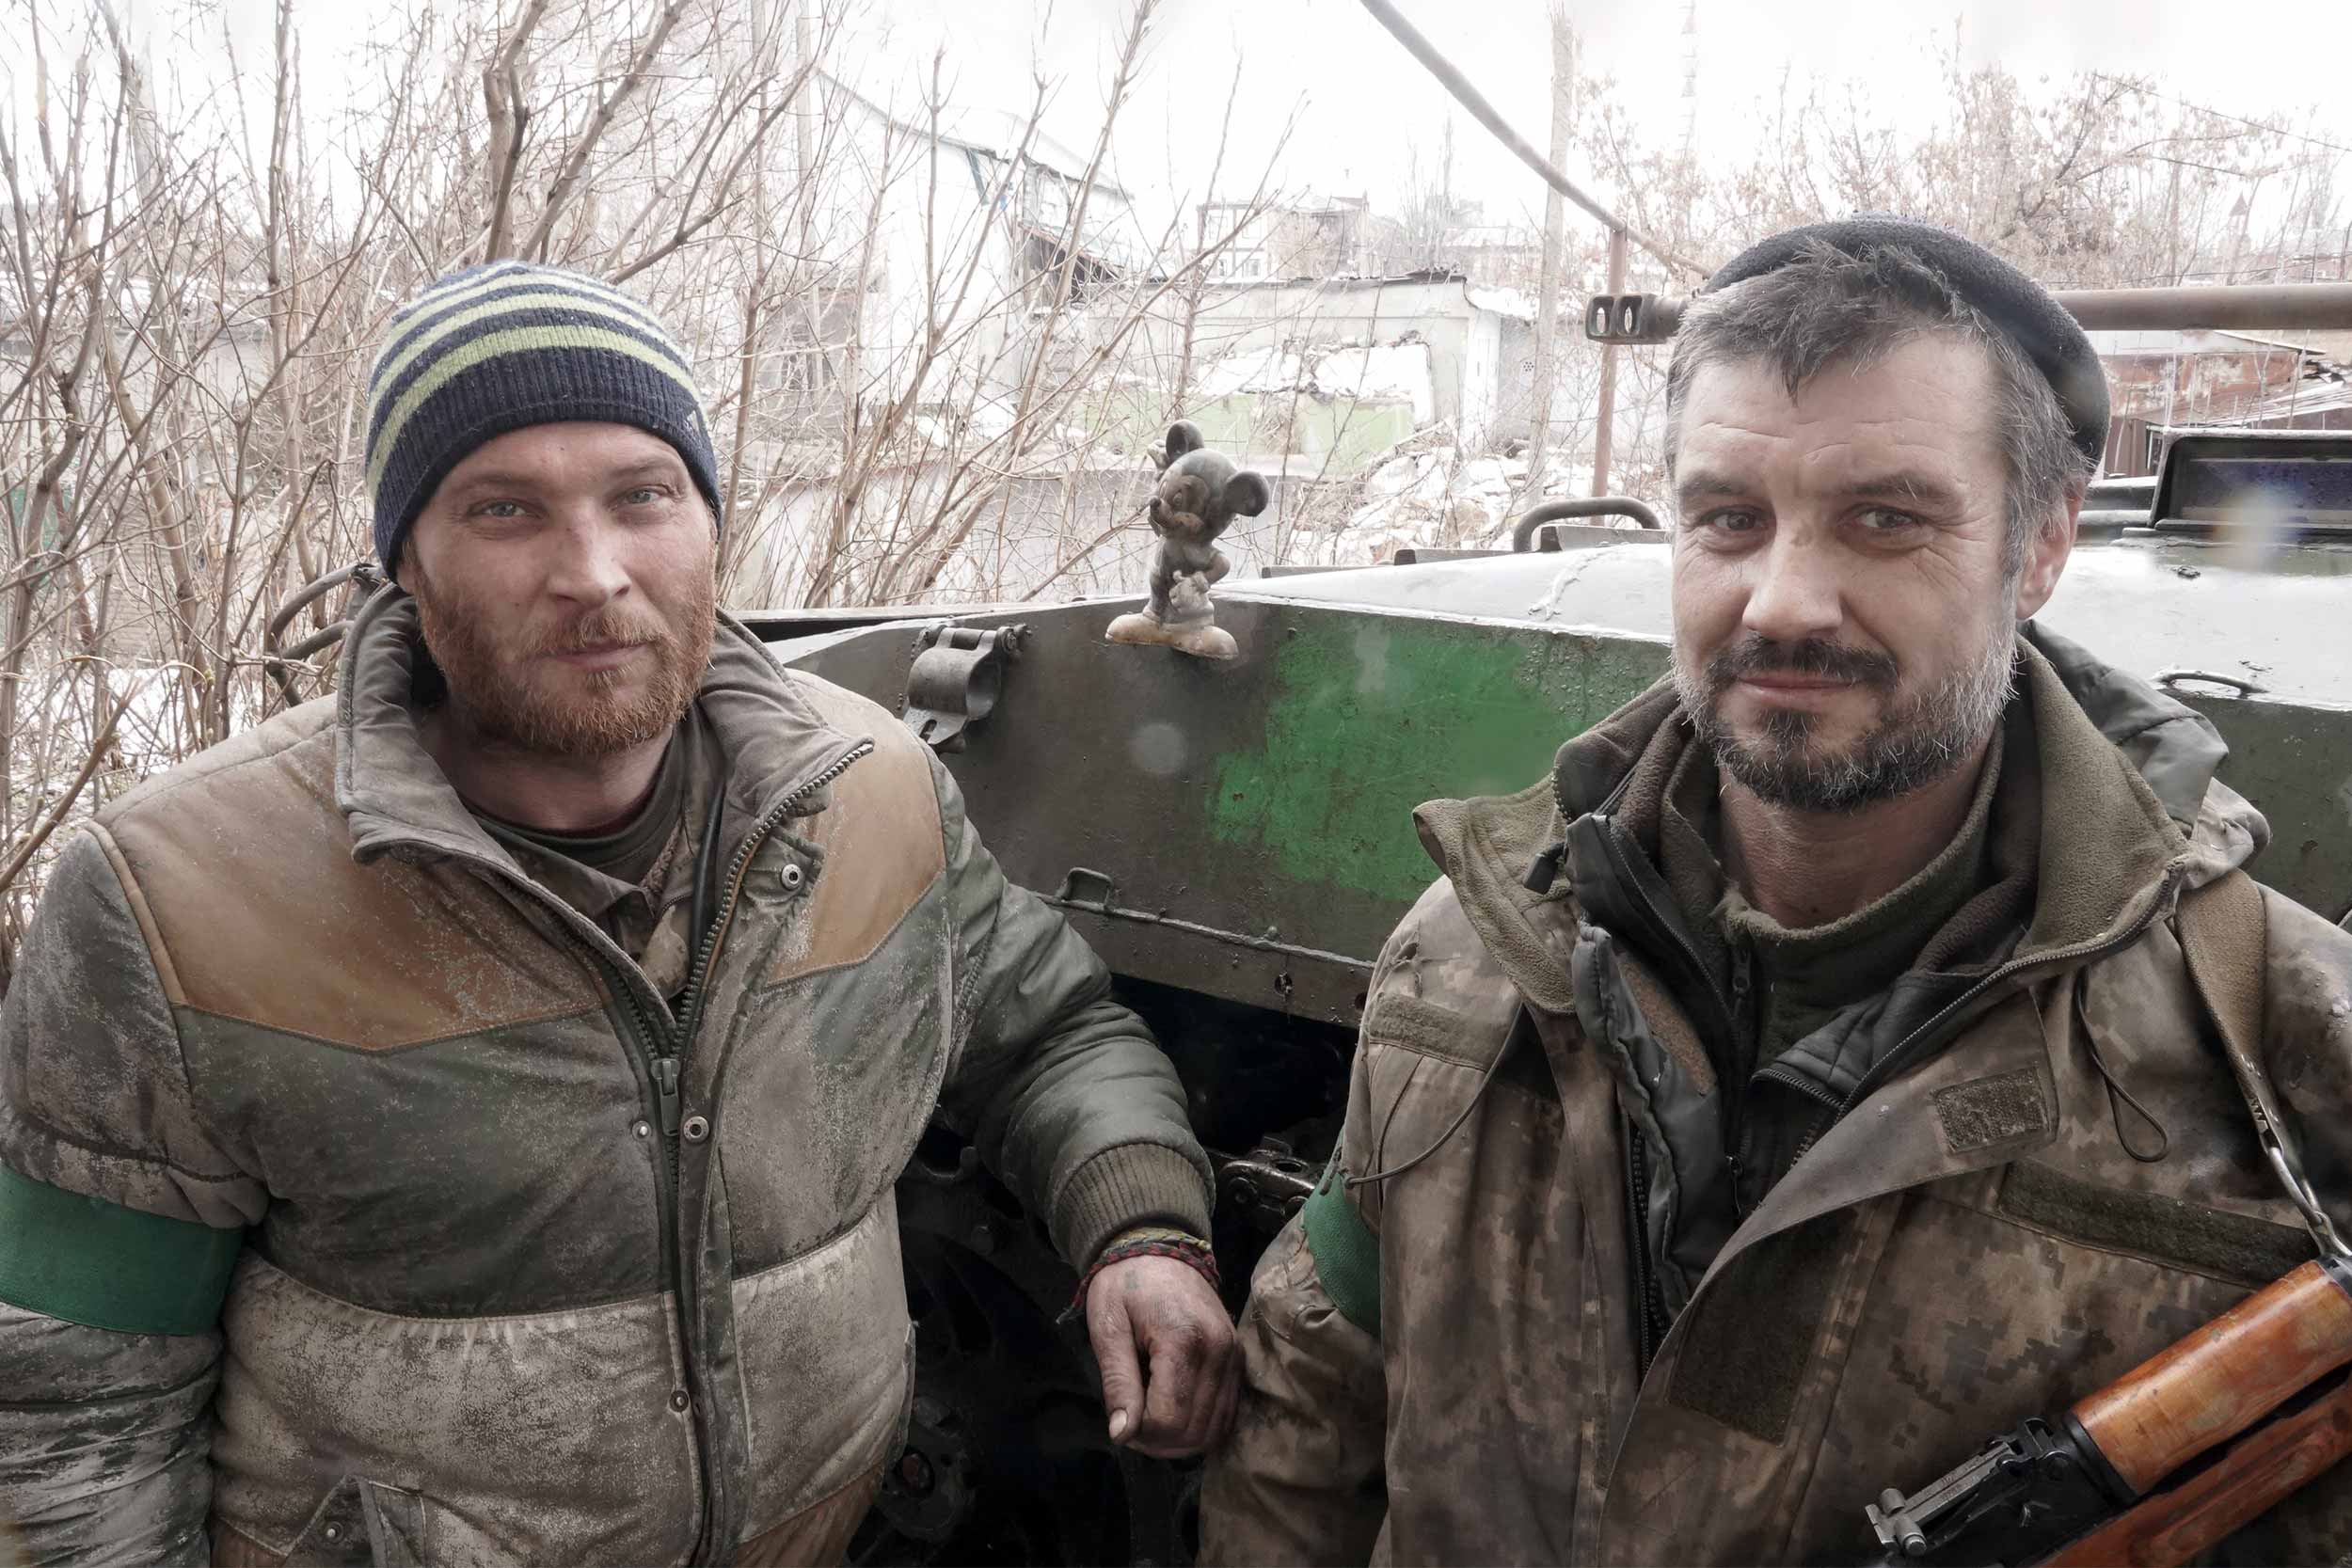 Six months ago Andrii (left) was a welder, Serhii (right) was a train conductor. Now in Bakhmut with the 93rd brigade of the Ukrainian forces, they wear no combat gear, no body armour, no helmets: two simple winter jackets. © Kolyan Pastyko